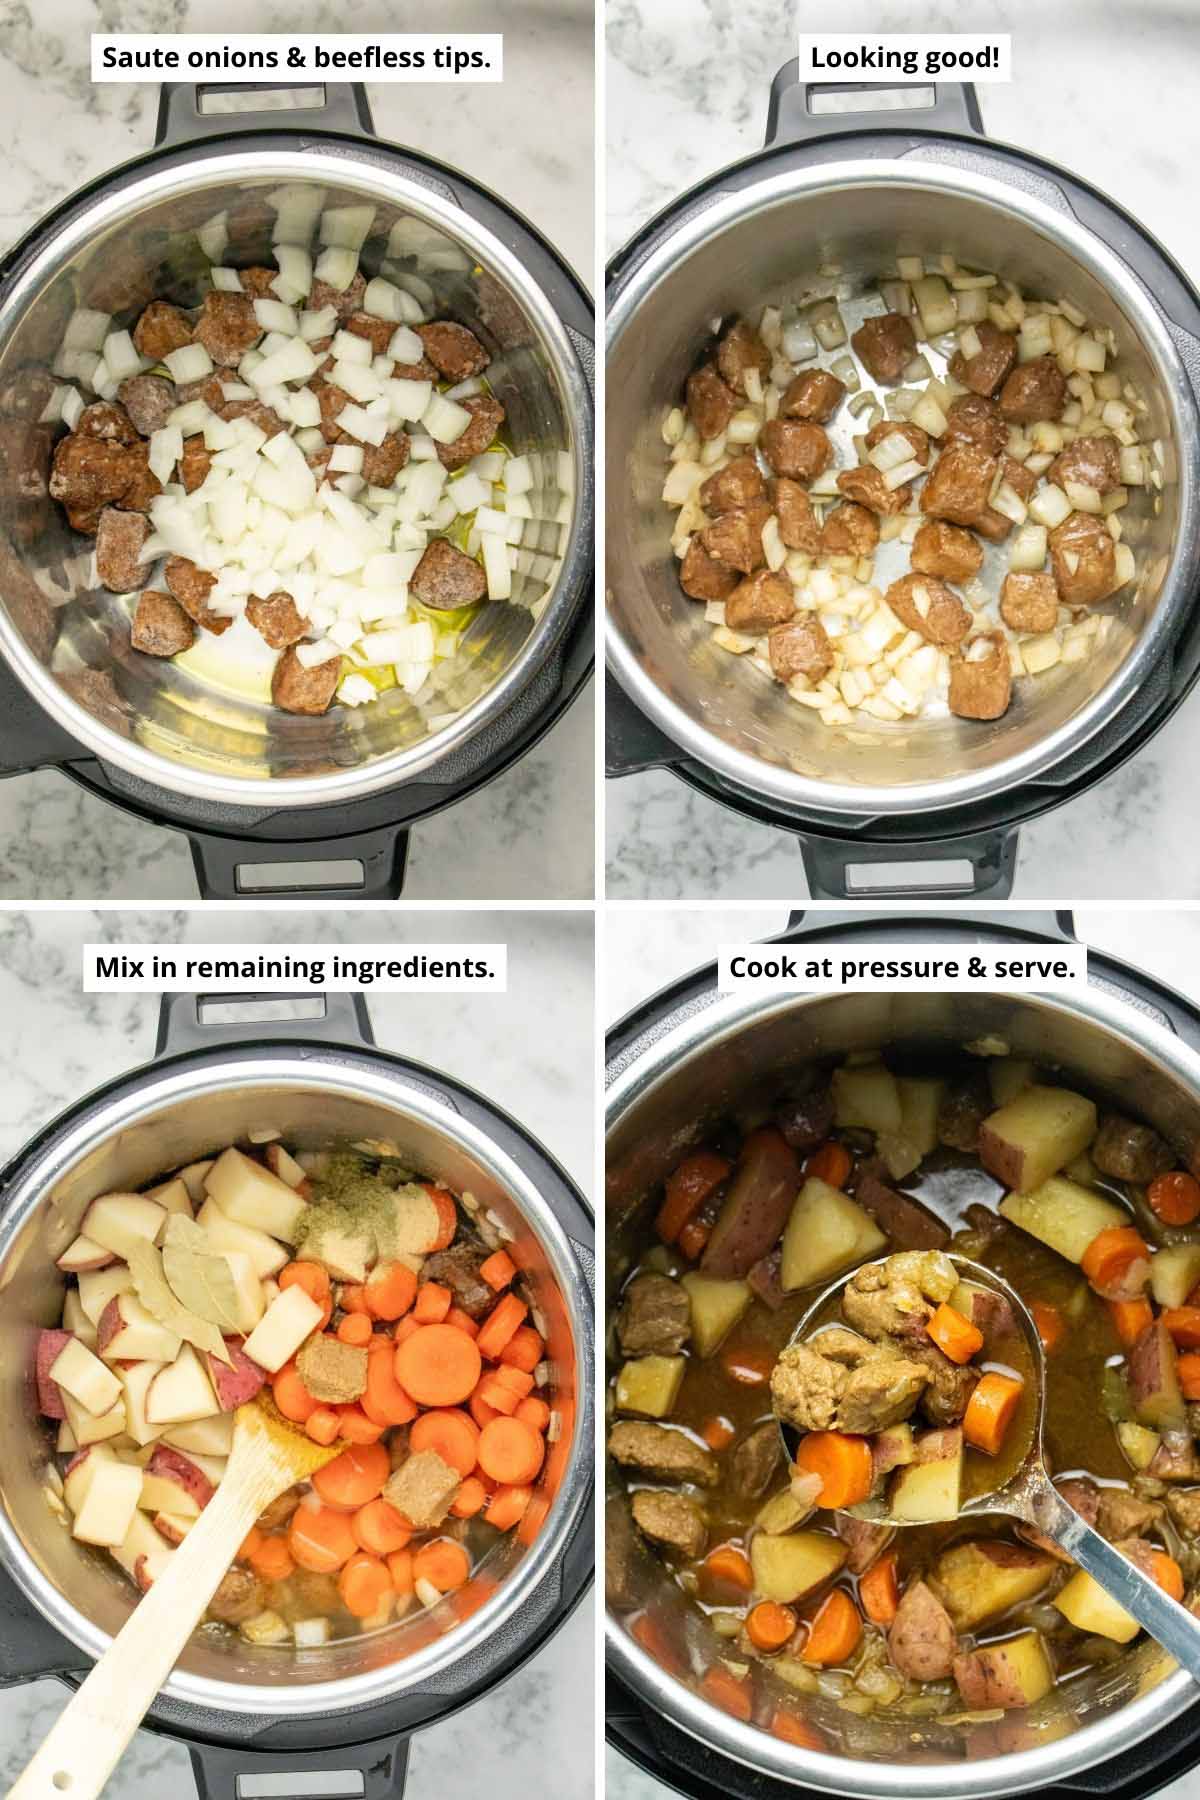 image collage showing beefless tips and onions before and after sautéing in the Instant Pot, adding the other stew ingredients, and the beefless stew in the pot after cooking